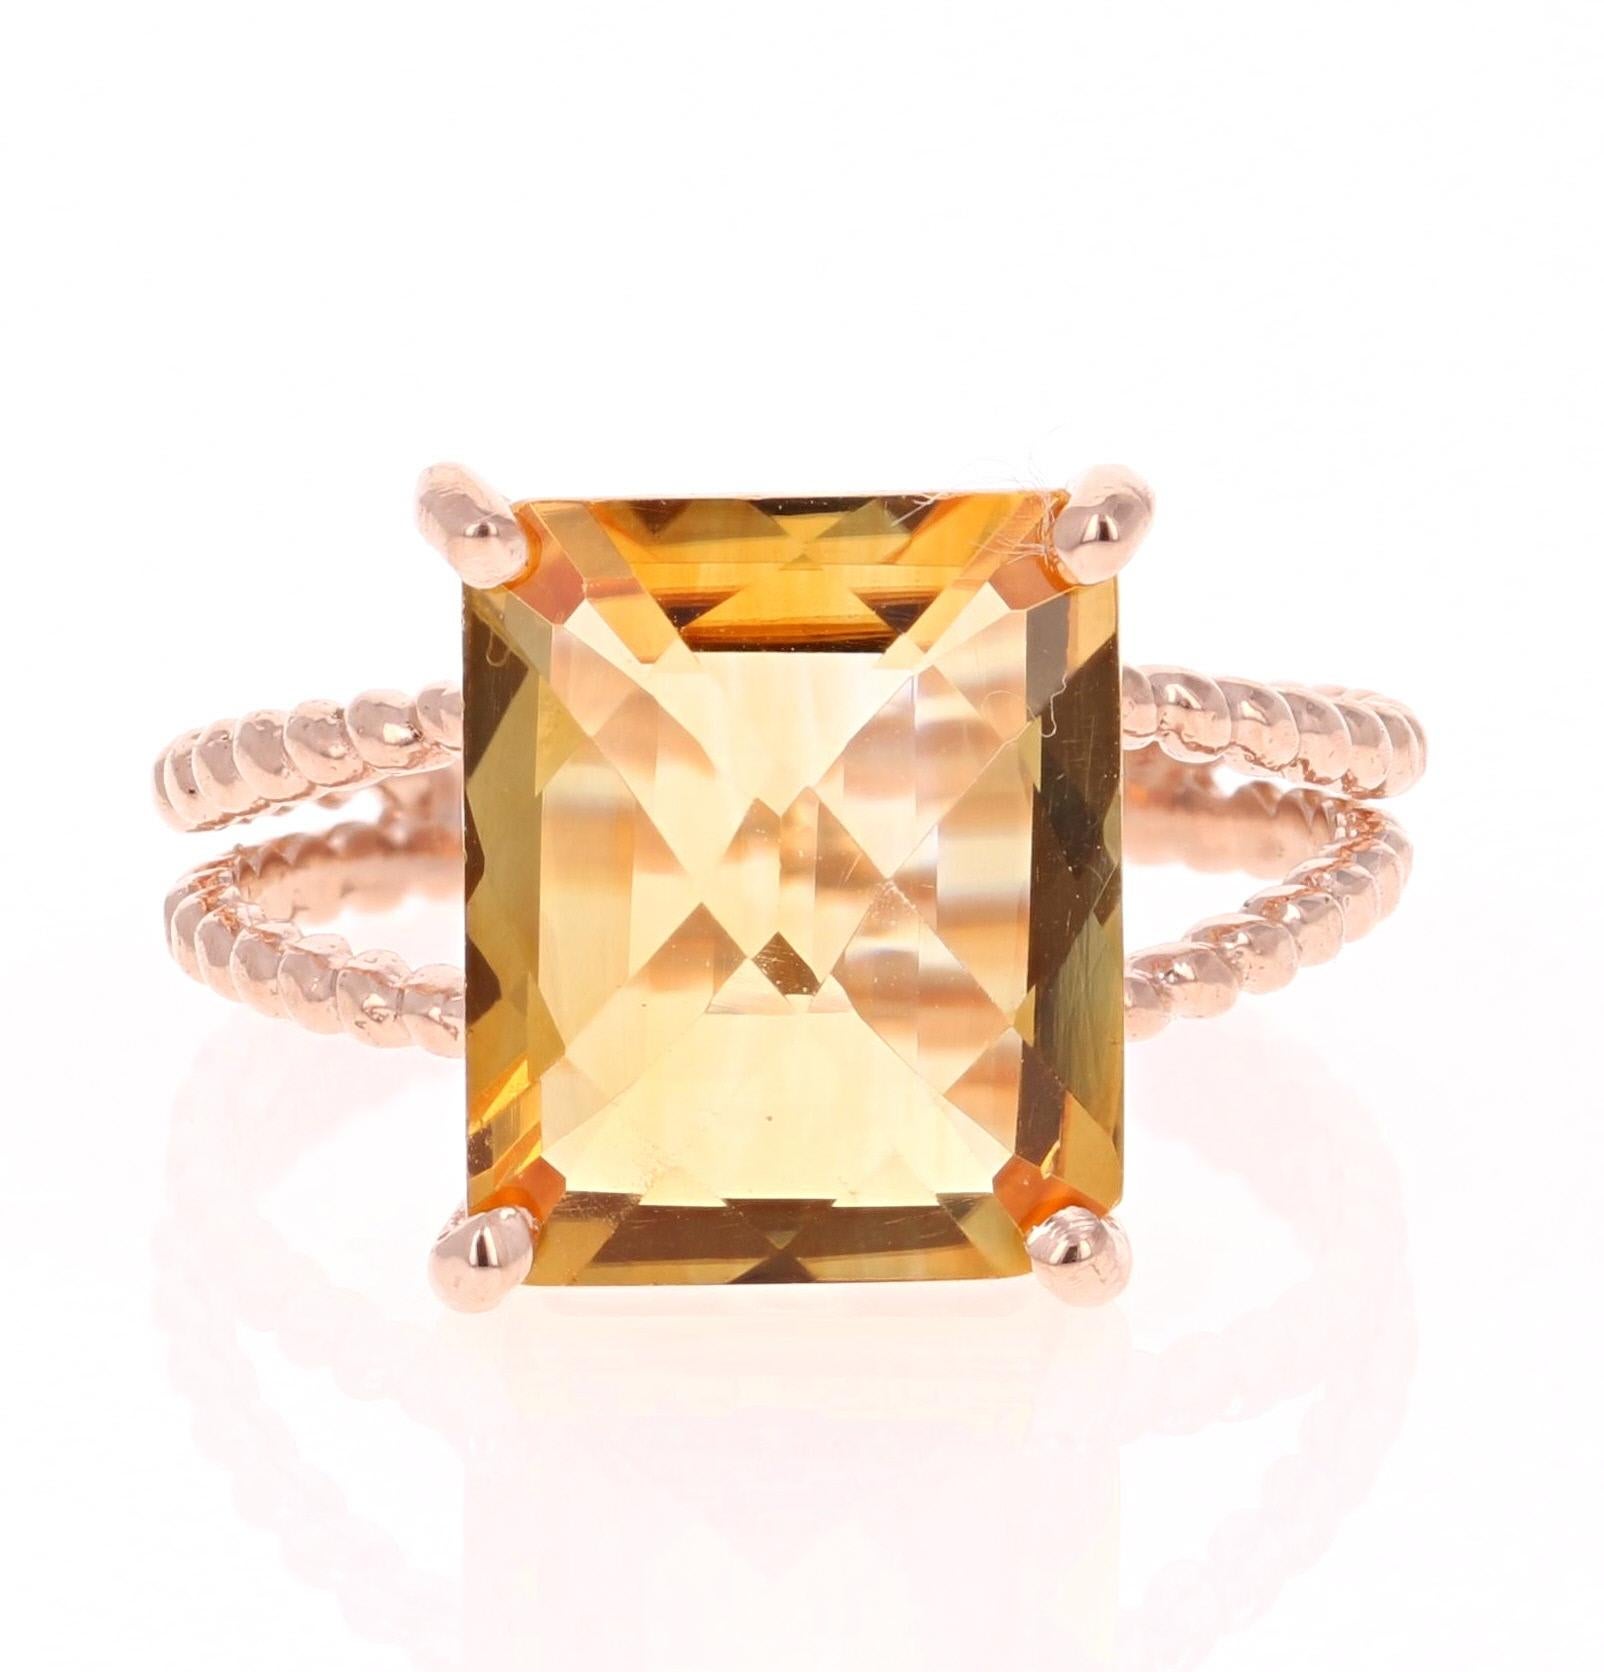 This beautiful and simple ring has a bright and vivid Emerald Cut Citrine Quartz in the center that weighs 4.99 carats. 
The setting is beautifully crafted in 14K Rose Gold and weighs approximately 3.2 grams.
The ring is a size 7 and can be re-sized